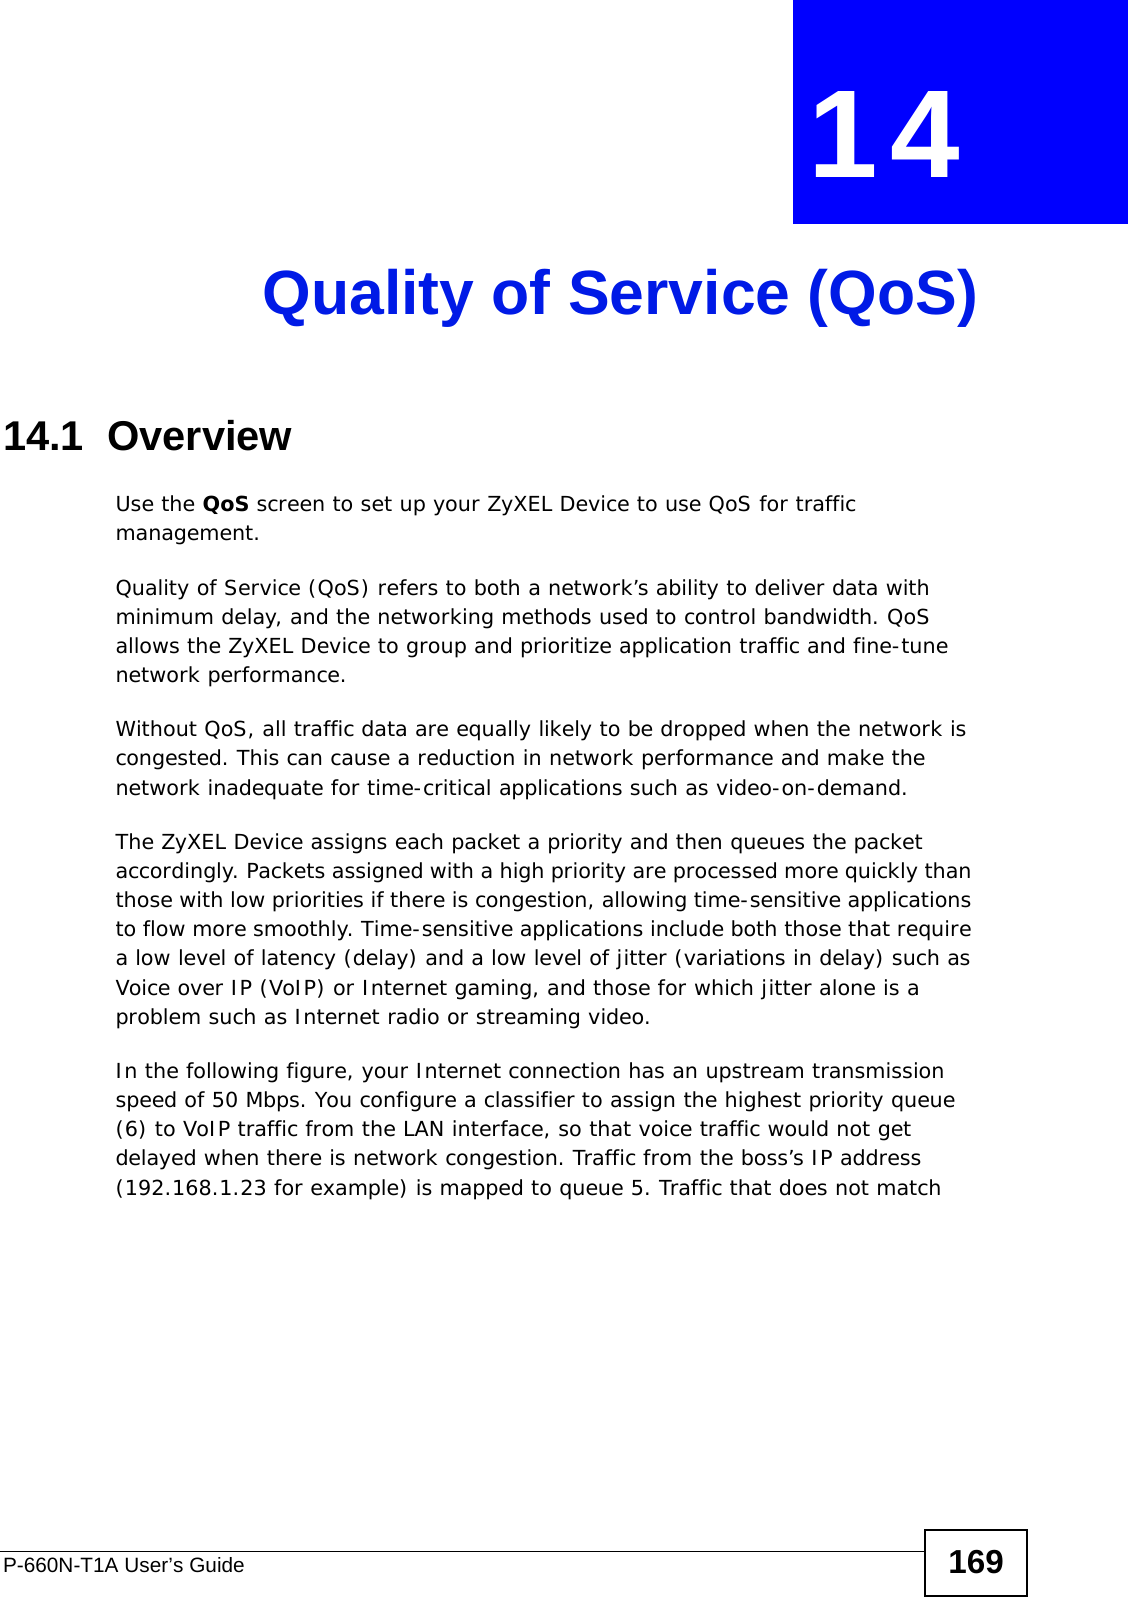 P-660N-T1A User’s Guide 169CHAPTER  14 Quality of Service (QoS)14.1  OverviewUse the QoS screen to set up your ZyXEL Device to use QoS for traffic management. Quality of Service (QoS) refers to both a network’s ability to deliver data with minimum delay, and the networking methods used to control bandwidth. QoS allows the ZyXEL Device to group and prioritize application traffic and fine-tune network performance. Without QoS, all traffic data are equally likely to be dropped when the network is congested. This can cause a reduction in network performance and make the network inadequate for time-critical applications such as video-on-demand.The ZyXEL Device assigns each packet a priority and then queues the packet accordingly. Packets assigned with a high priority are processed more quickly than those with low priorities if there is congestion, allowing time-sensitive applications to flow more smoothly. Time-sensitive applications include both those that require a low level of latency (delay) and a low level of jitter (variations in delay) such as Voice over IP (VoIP) or Internet gaming, and those for which jitter alone is a problem such as Internet radio or streaming video.In the following figure, your Internet connection has an upstream transmission speed of 50 Mbps. You configure a classifier to assign the highest priority queue (6) to VoIP traffic from the LAN interface, so that voice traffic would not get delayed when there is network congestion. Traffic from the boss’s IP address (192.168.1.23 for example) is mapped to queue 5. Traffic that does not match 